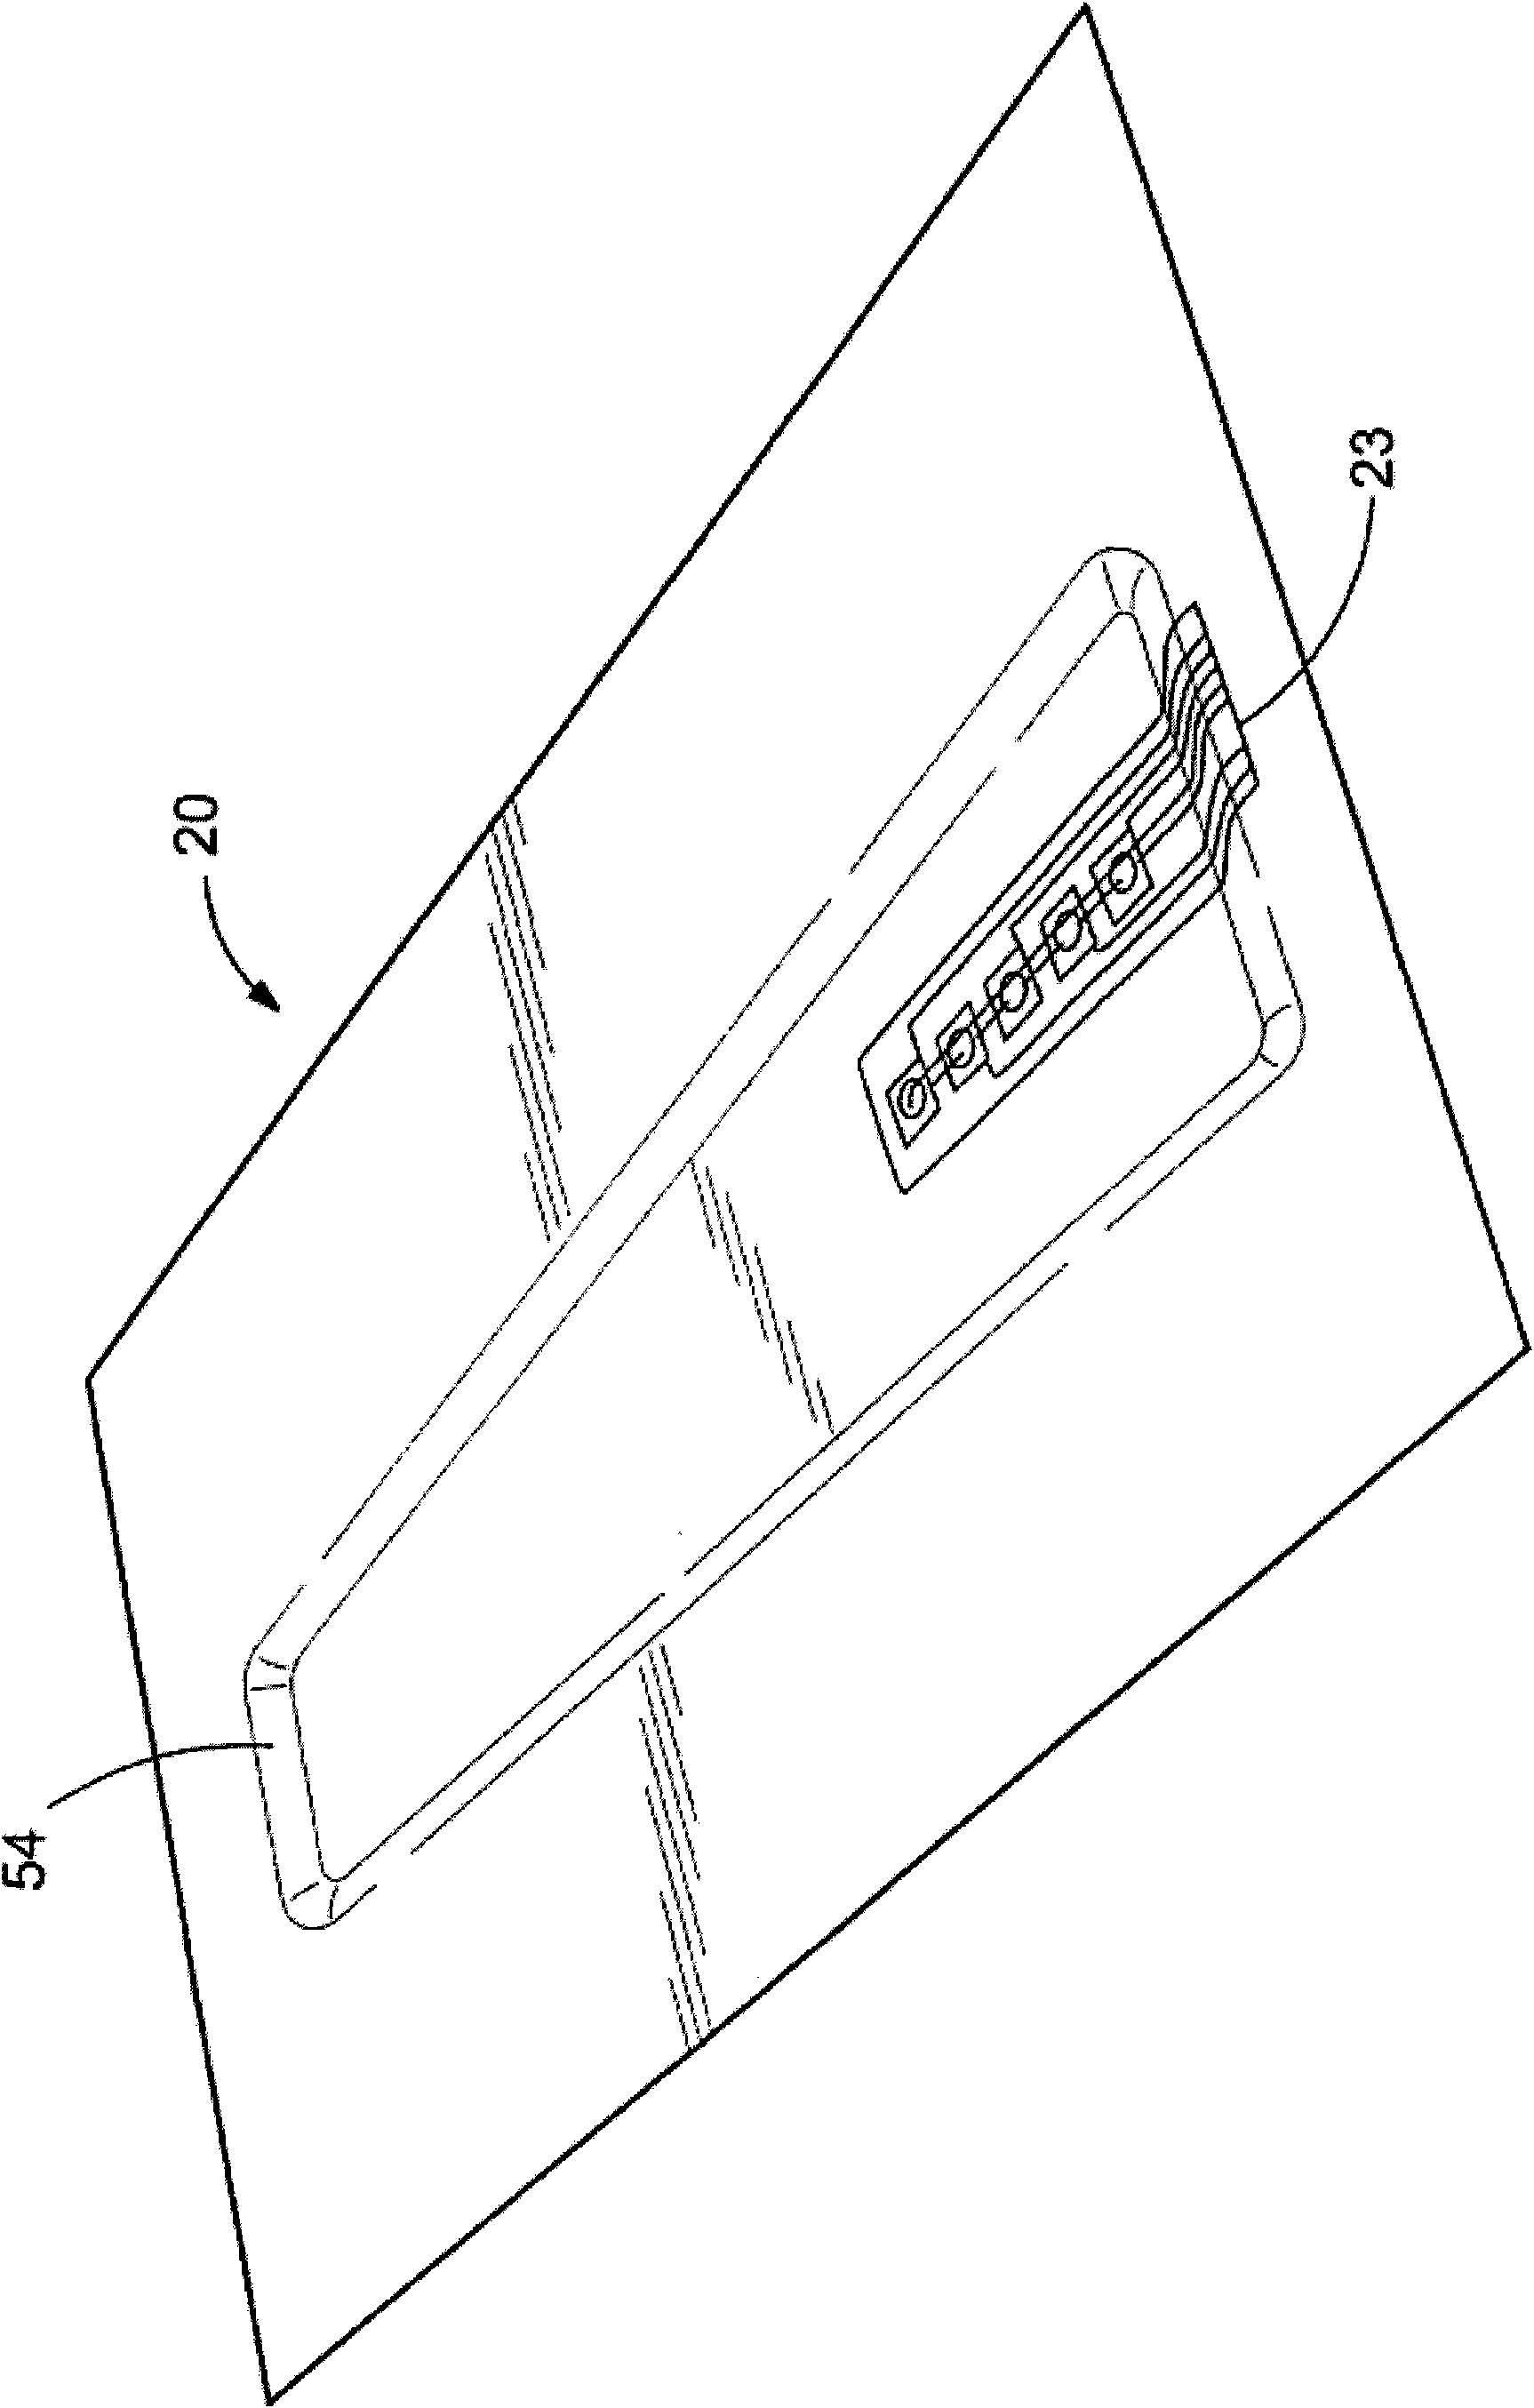 In-molded capacitive switch